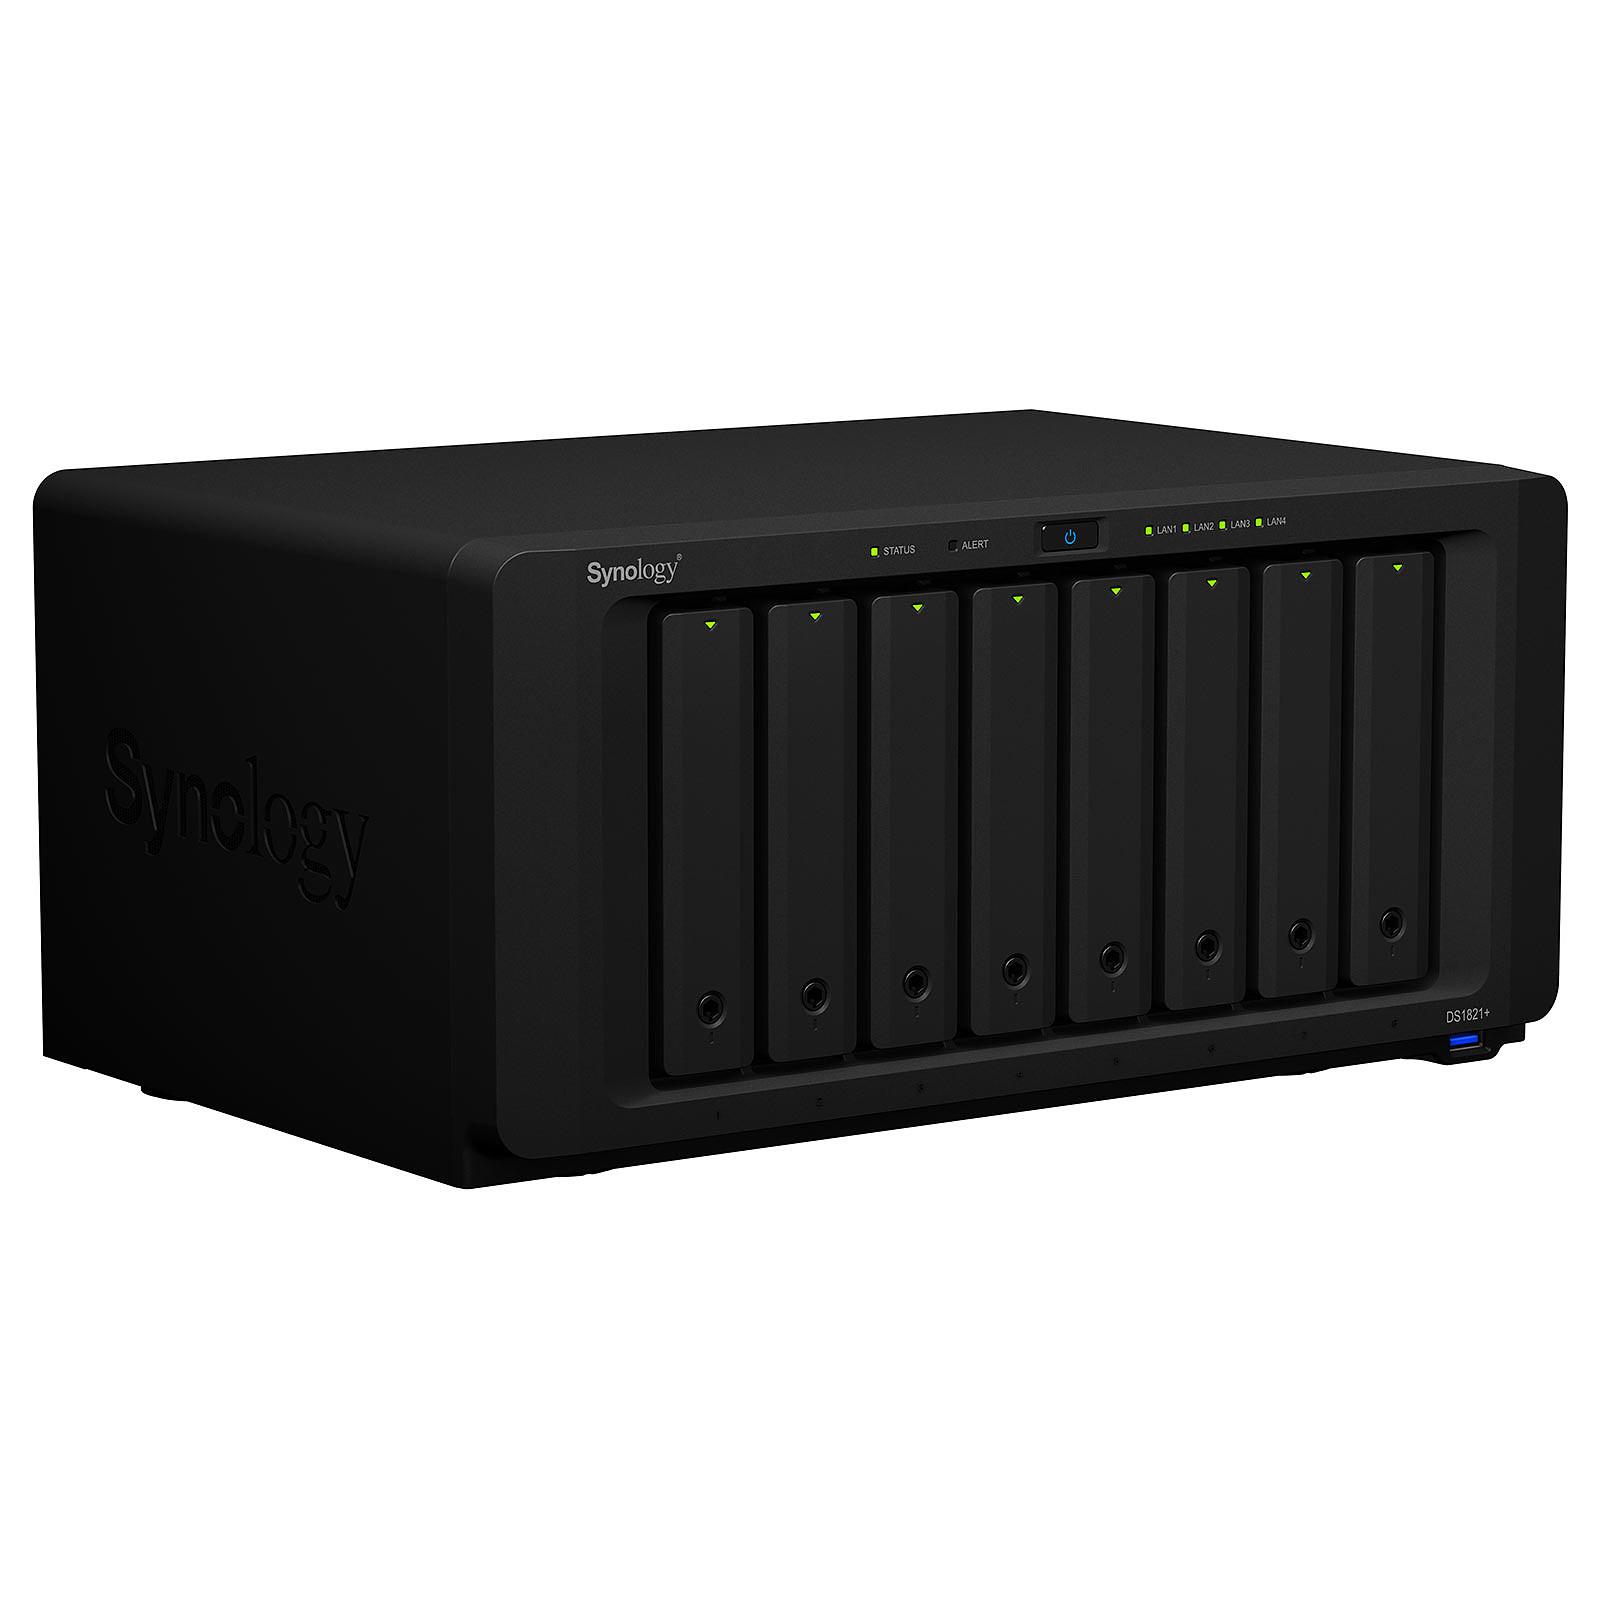 SYNOLOGY DS1821+ 8BAY